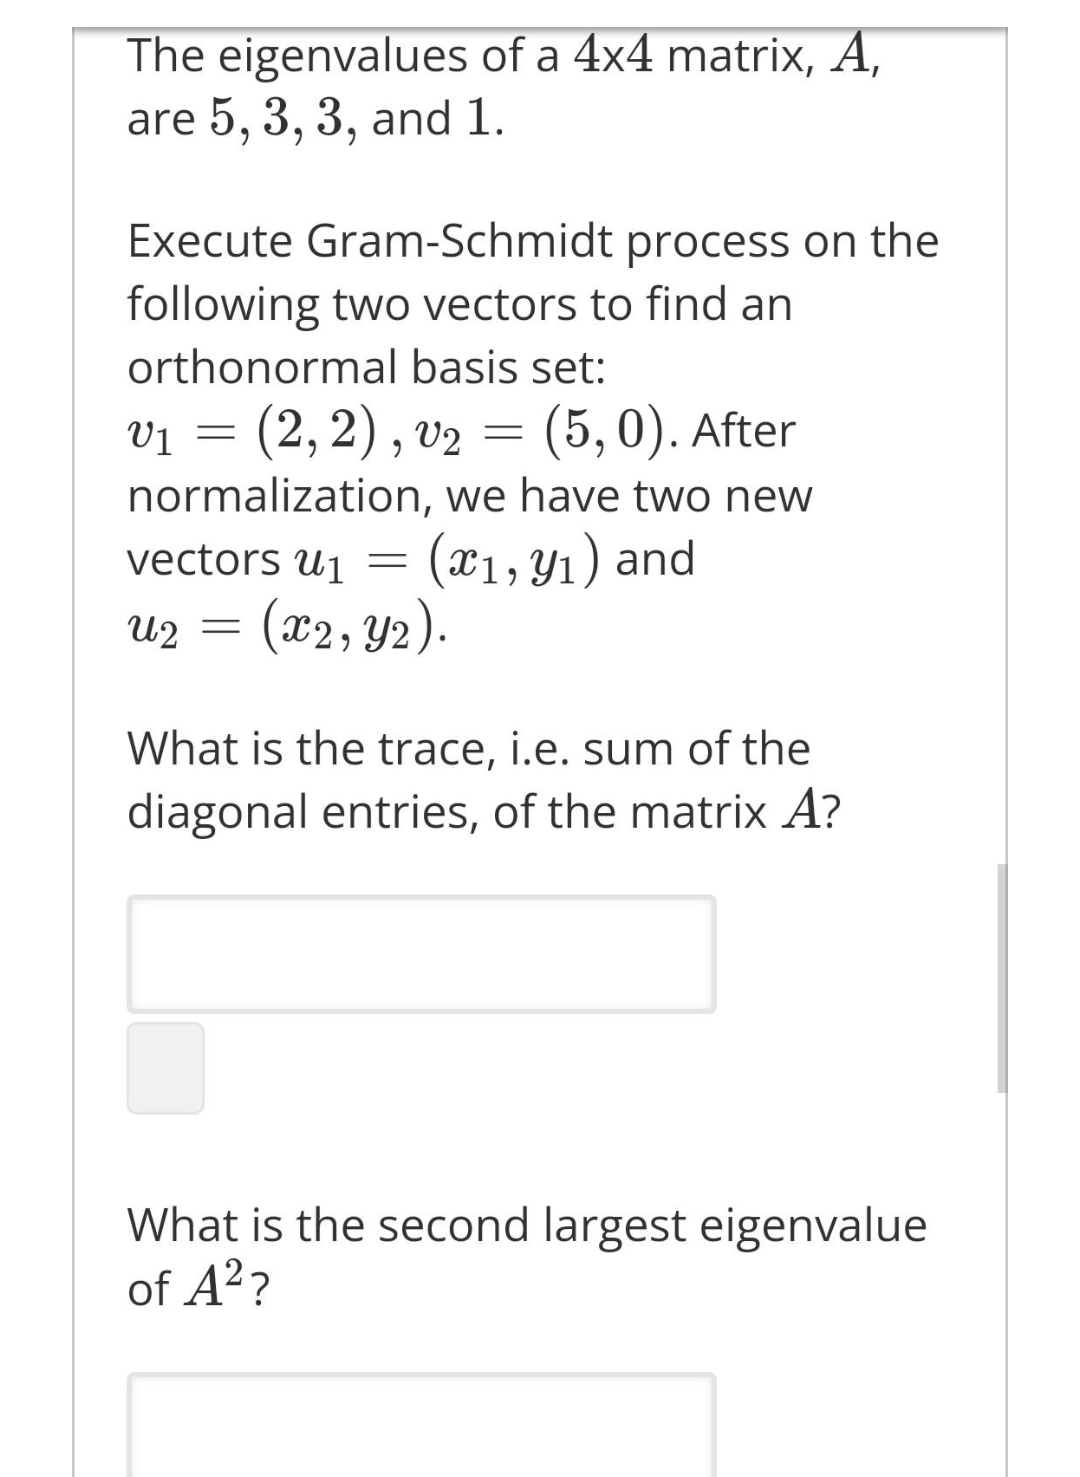 The eigenvalues of a 4x4 matrix, A,
are 5, 3, 3, and 1.
Execute Gram-Schmidt process on the
following two vectors to find an
orthonormal basis set:
Vị
(2,2), v2 =
(5, 0). After
normalization, we have two new
(x1, Y1) and
(x2, Y2).
vectors u1
U2
What is the trace, i.e. sum of the
diagonal entries, of the matrix A?
What is the second largest eigenvalue
of A??
